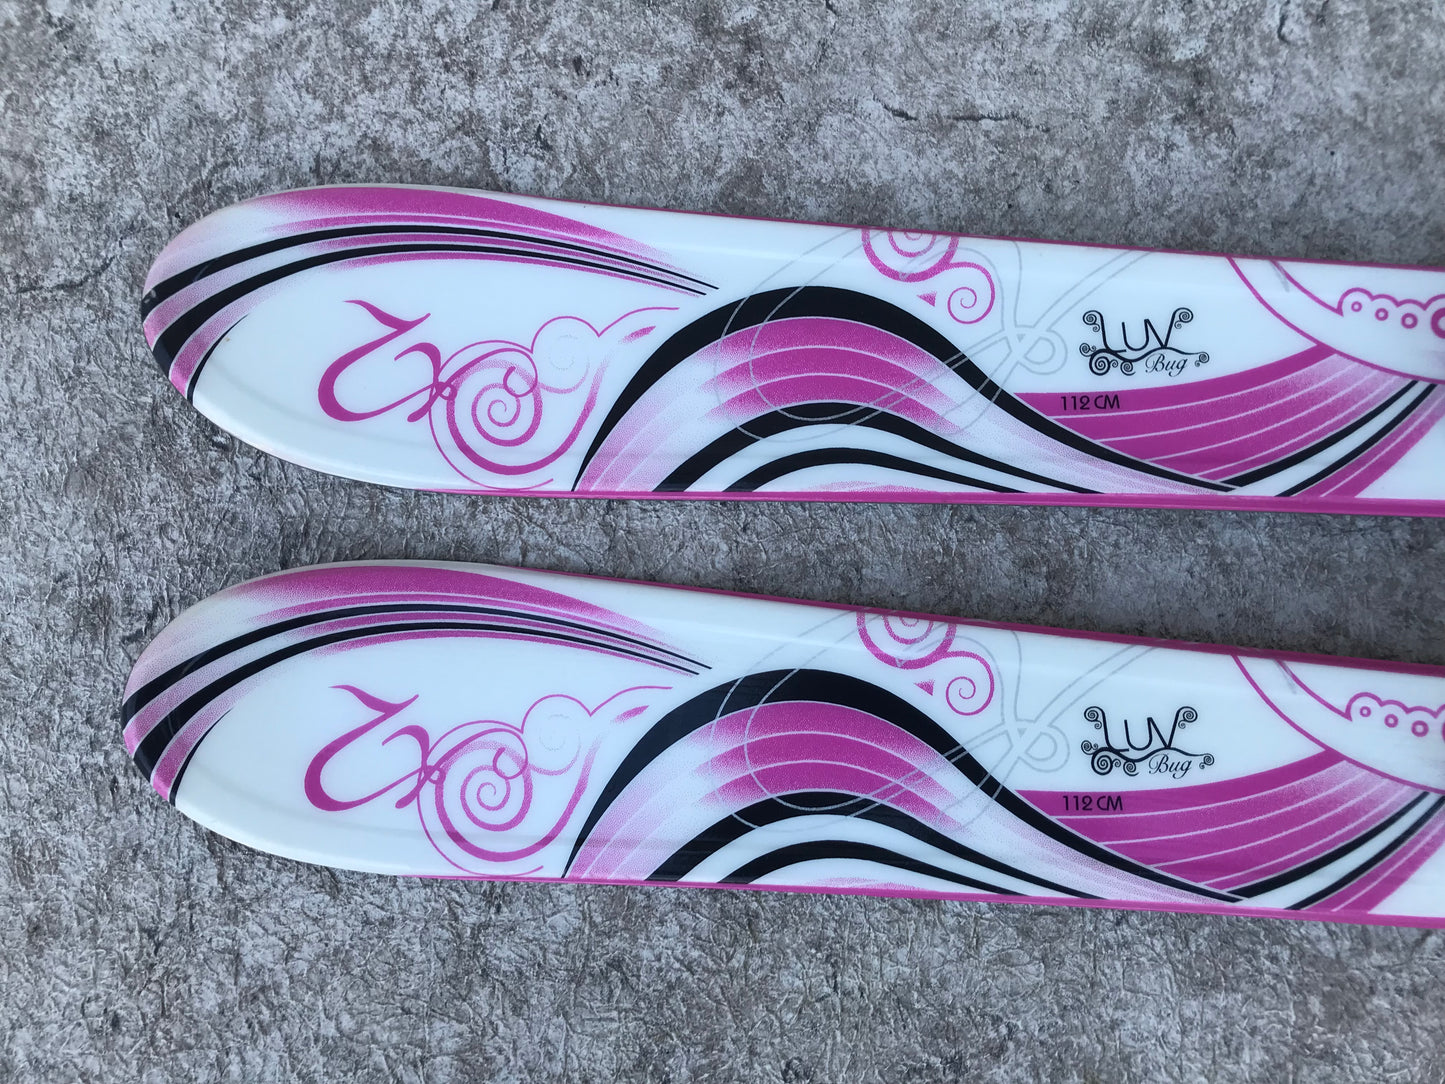 Ski 112 K-2 Luv Bug Parabolic Pink White With Bindings Excellent